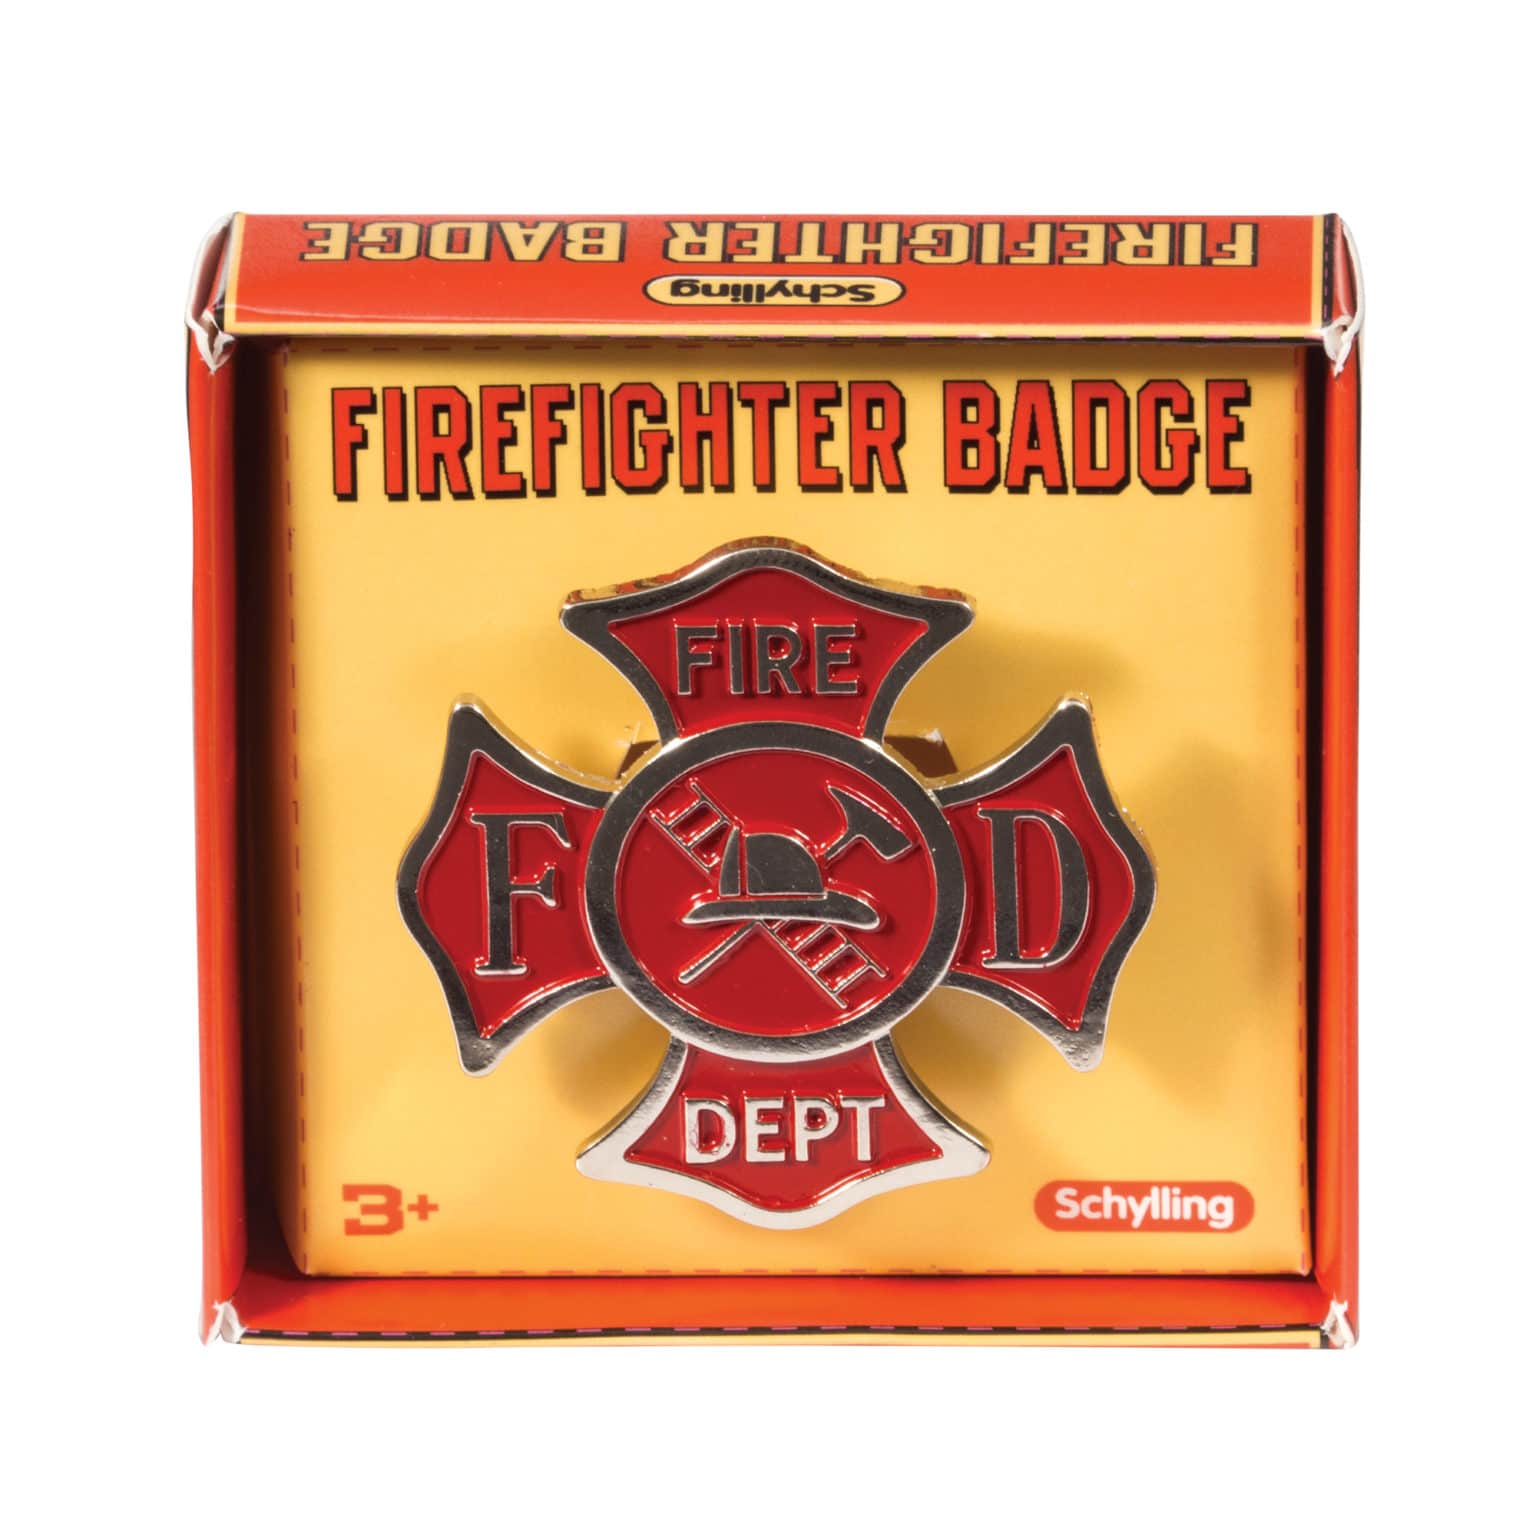 firefighter-badge-schylling